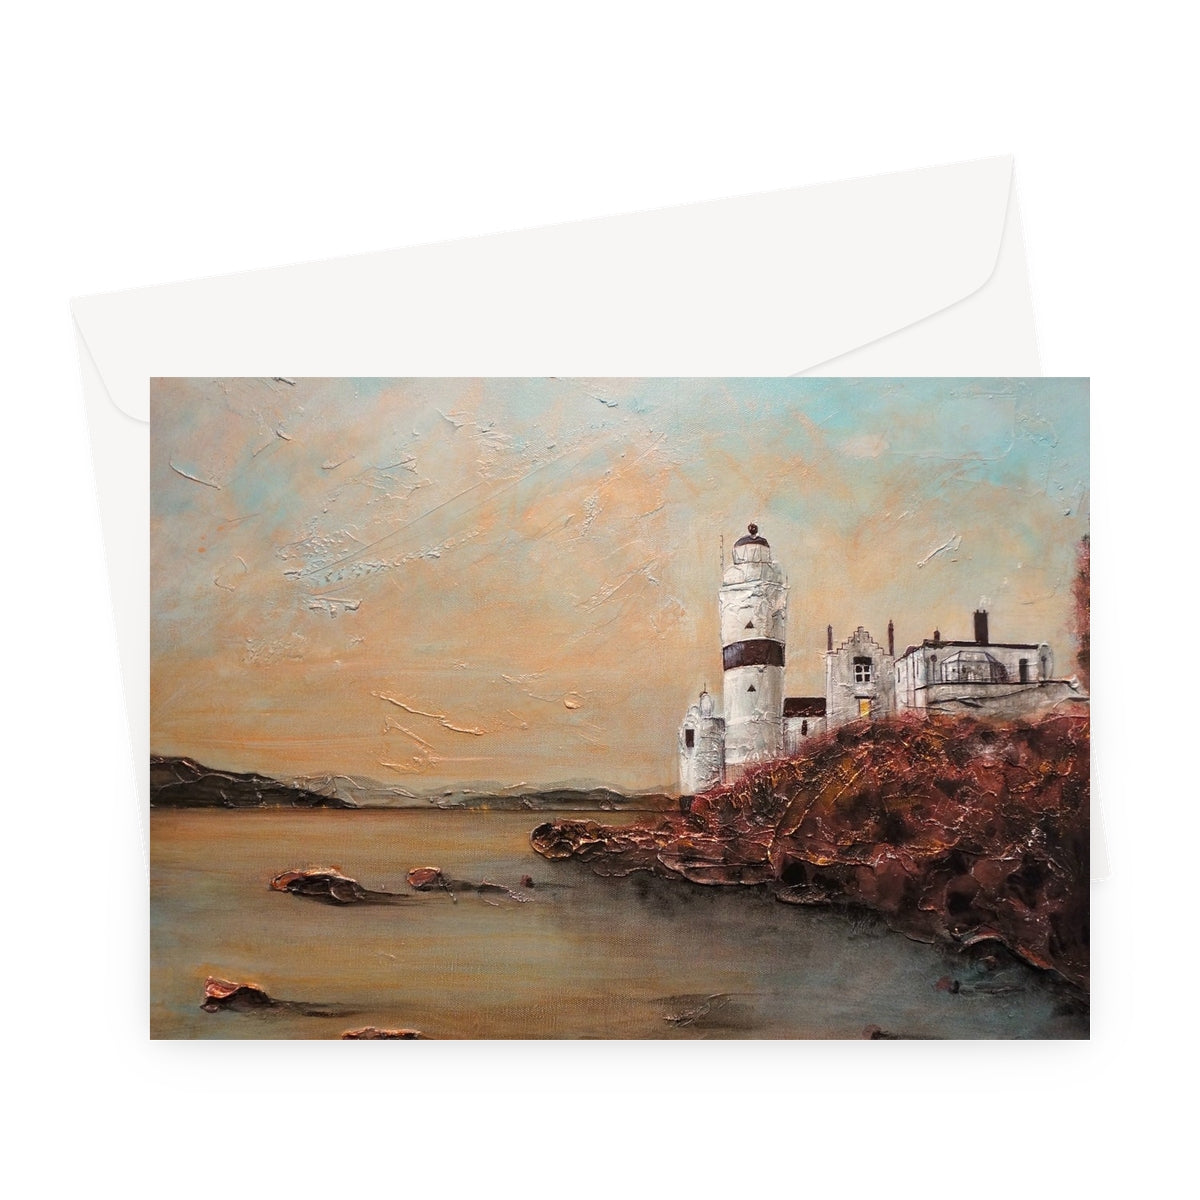 Cloch Lighthouse Dawn Art Gifts Greeting Card-Greetings Cards-River Clyde Art Gallery-A5 Landscape-1 Card-Paintings, Prints, Homeware, Art Gifts From Scotland By Scottish Artist Kevin Hunter